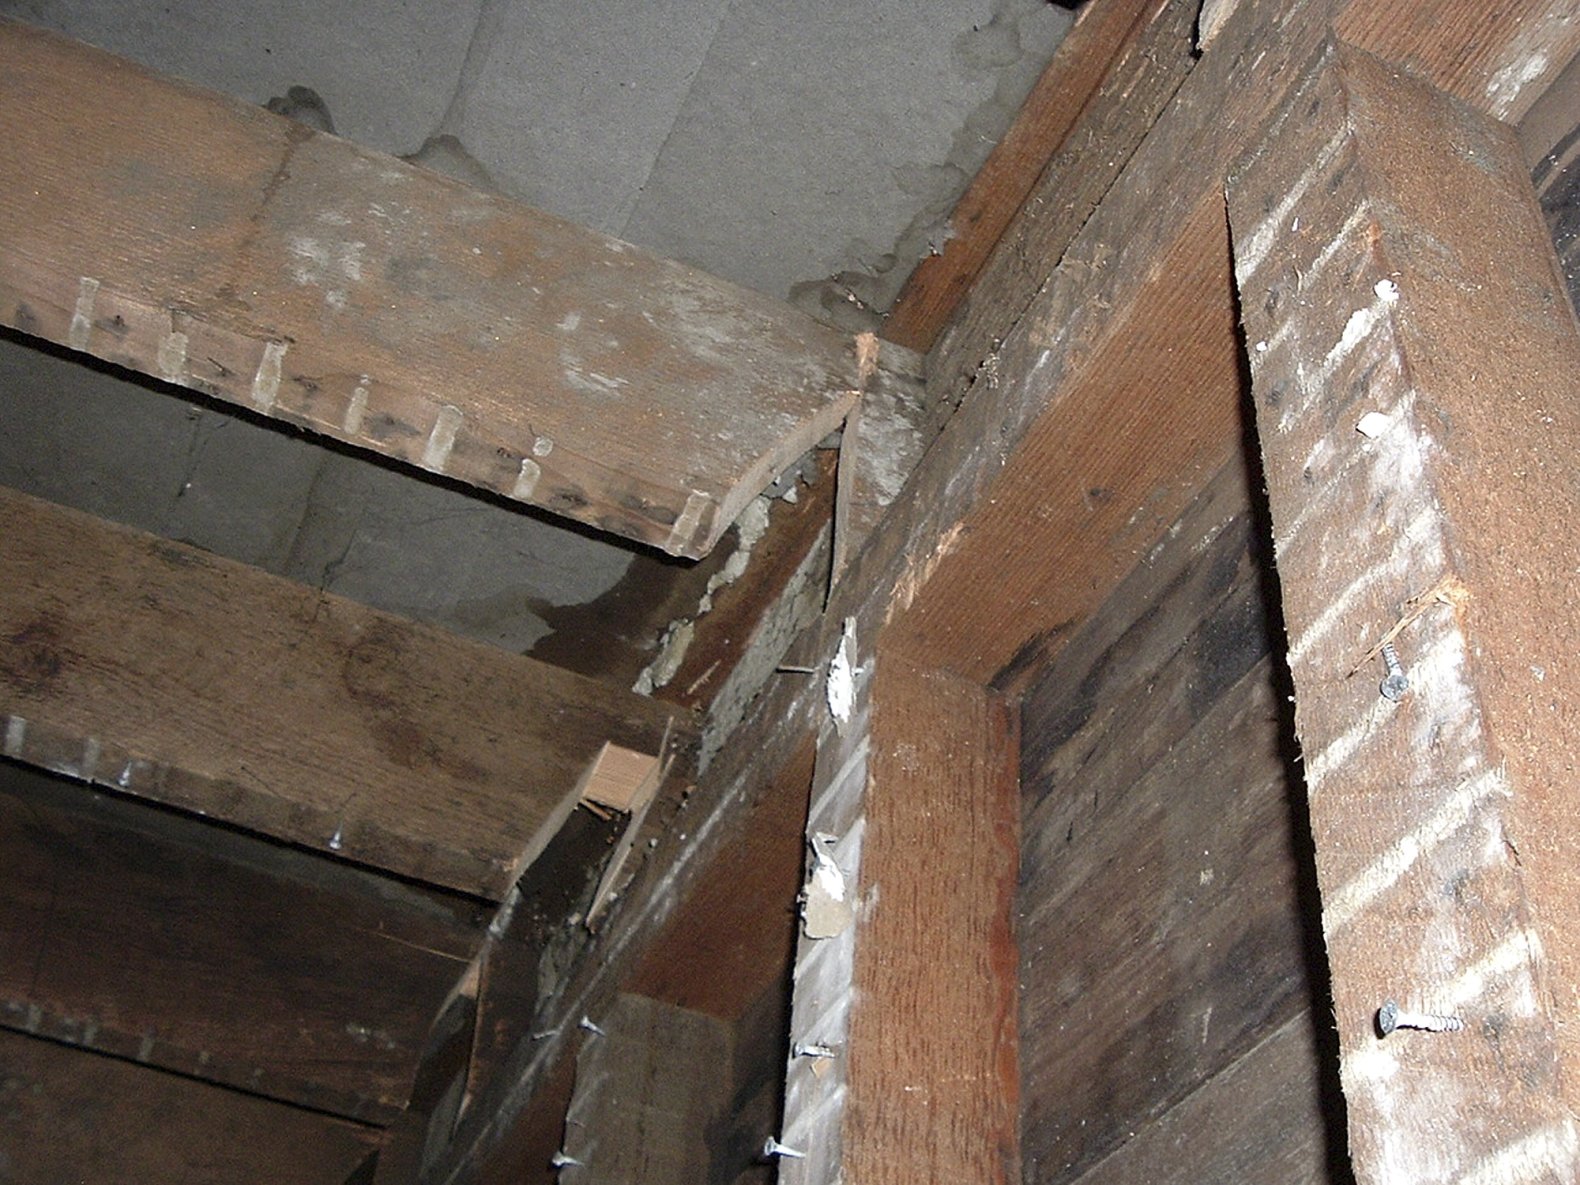 This undated photo released by the San Francisco Office of the District Attorney shows cut joists under the floor of a San Francisco apartment. A couple prosecutors dubbed the “landlords from hell” for going to scary lengths to drive tenants from a San Francisco apartment building has pleaded guilty to several felonies. Prosecutors said Wednesday that 37-year-old Nicole Macy and 38-year-old Kip Macy threatened to shoot tenants, changed locks, cleared apartments of belongings, and sawed holes in floors, all in an attempt to drive renters out of their building in the increasingly pricey South of Market neighborhood. (AP Photo/San Francisco Office of the District Attorney)